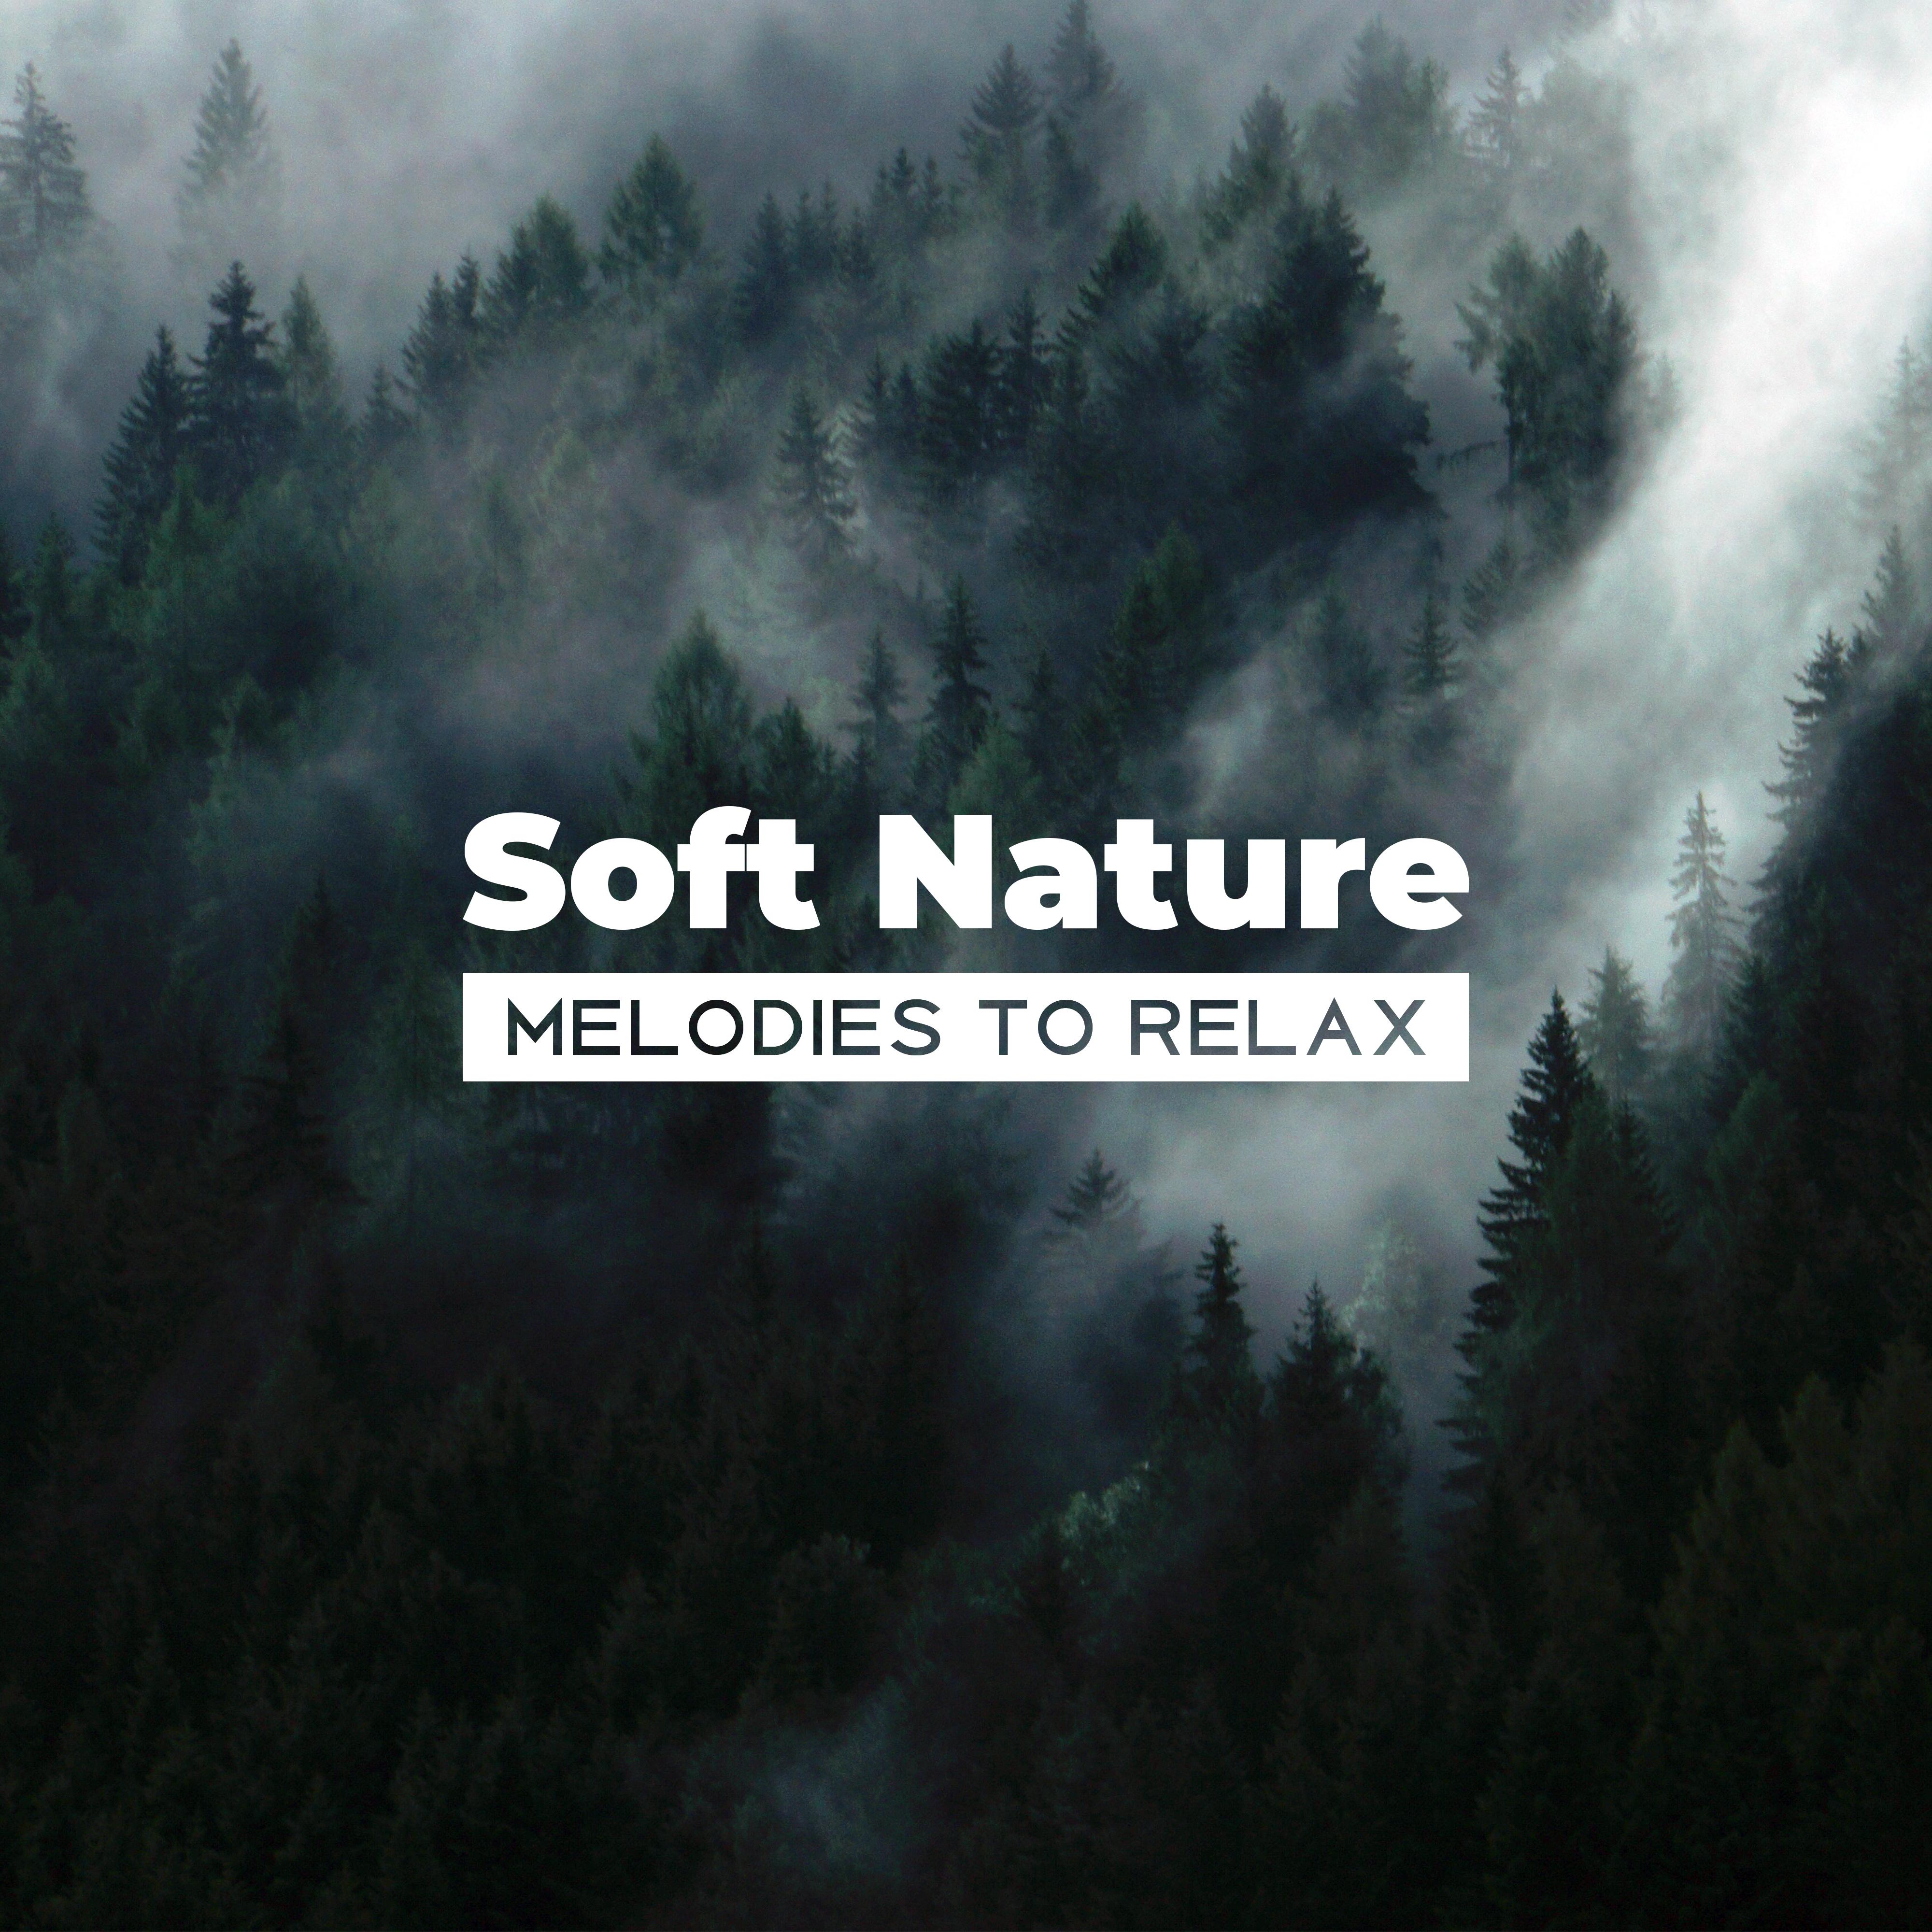 Soft Nature Melodies to Relax